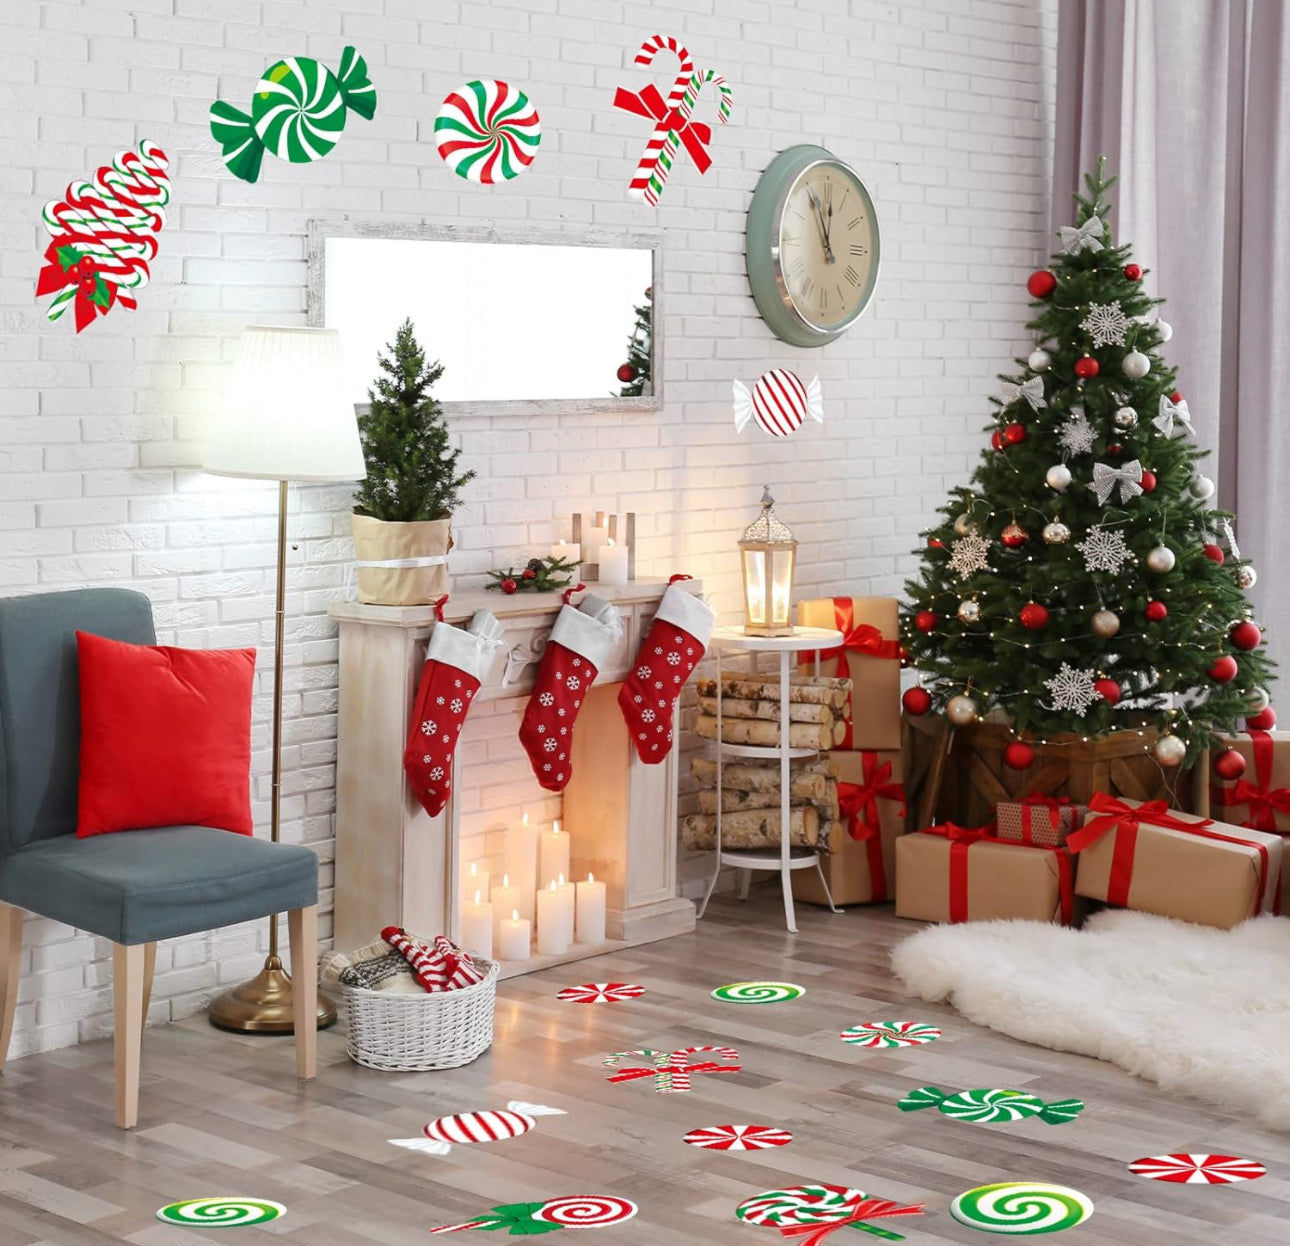 45 Pcs Peppermint Floor Stickers Decals Christmas Candyland Party Decorations Self Adhesive Christmas Candy Stickers for Xmas Valentine's Day Floor Window Clings Decor (Cute Style)